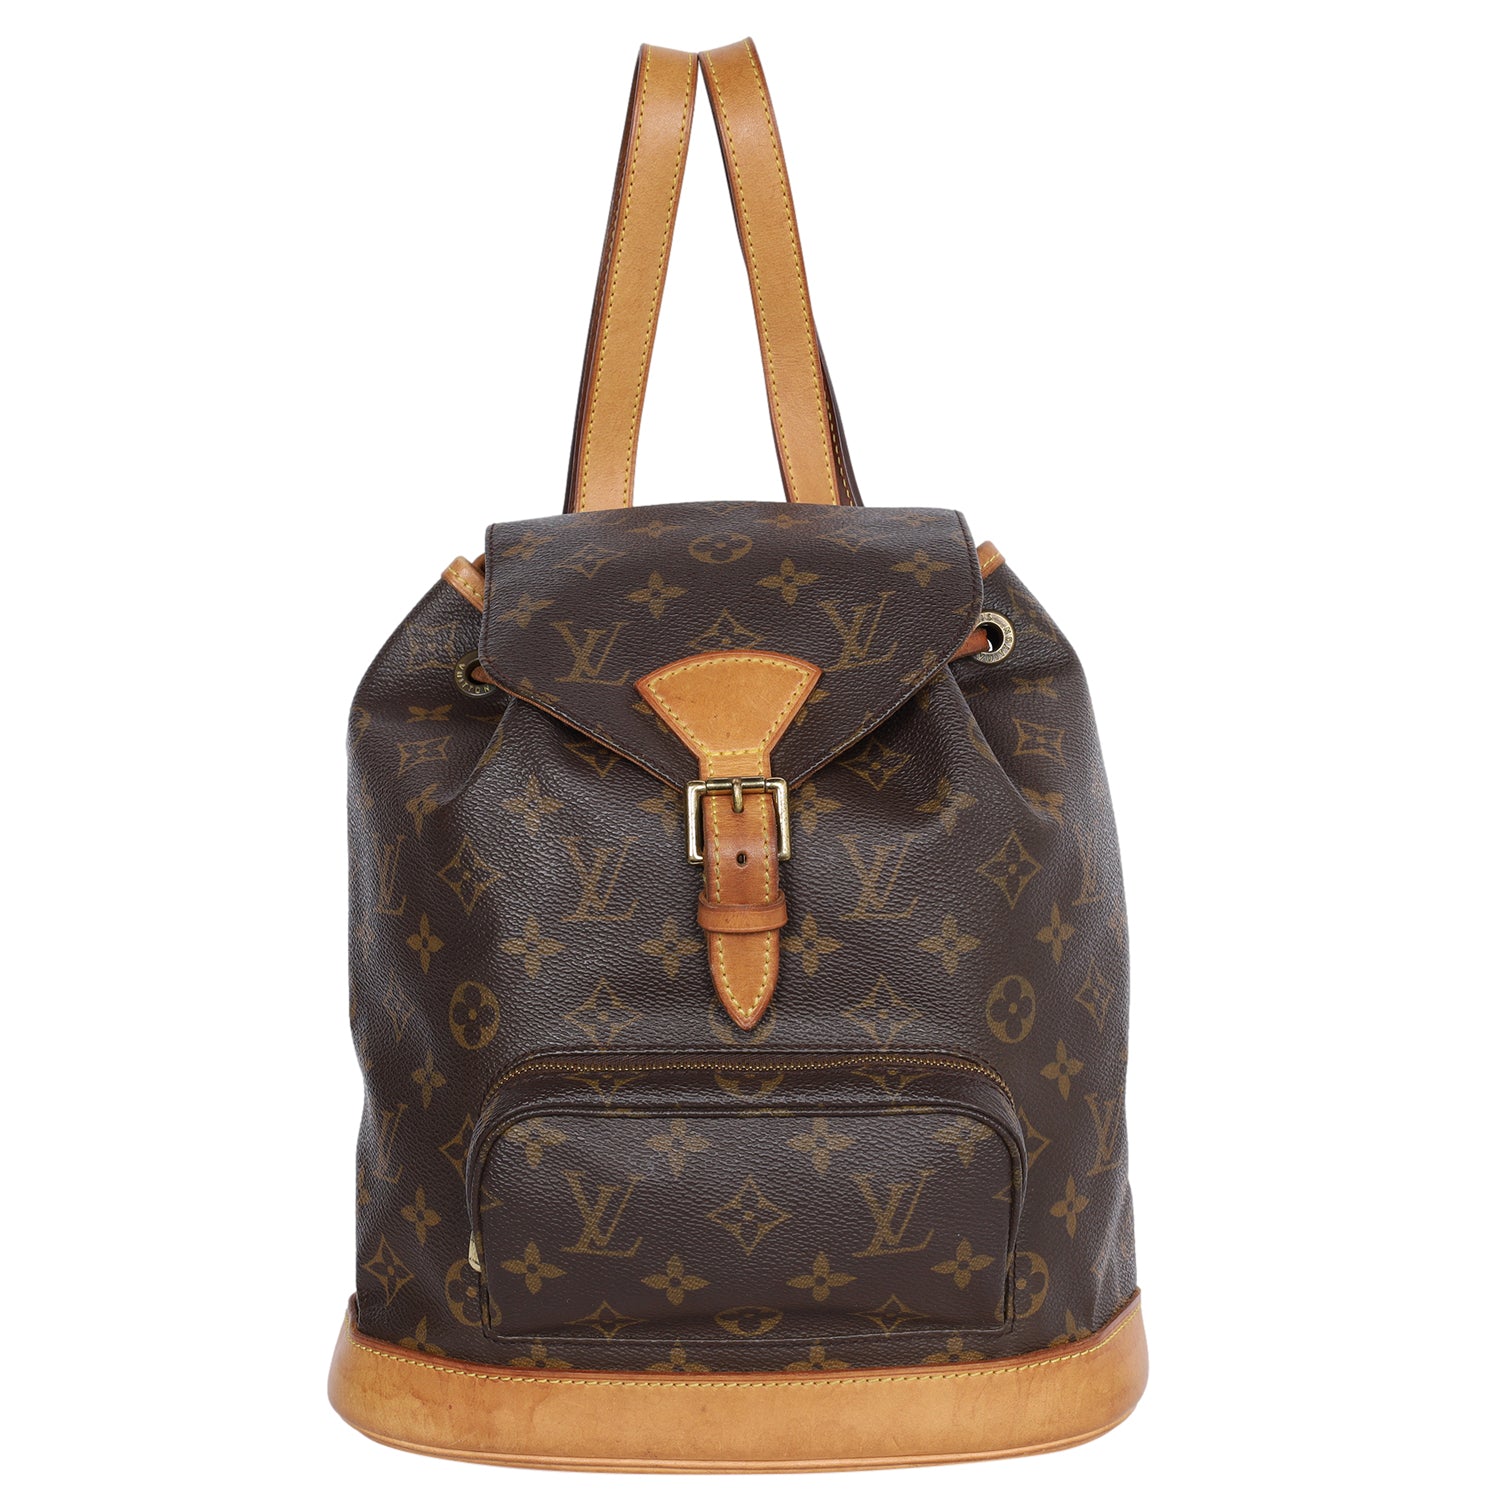 Montsouris Backpack MM (Authentic Pre-Owned) – The Lady Bag